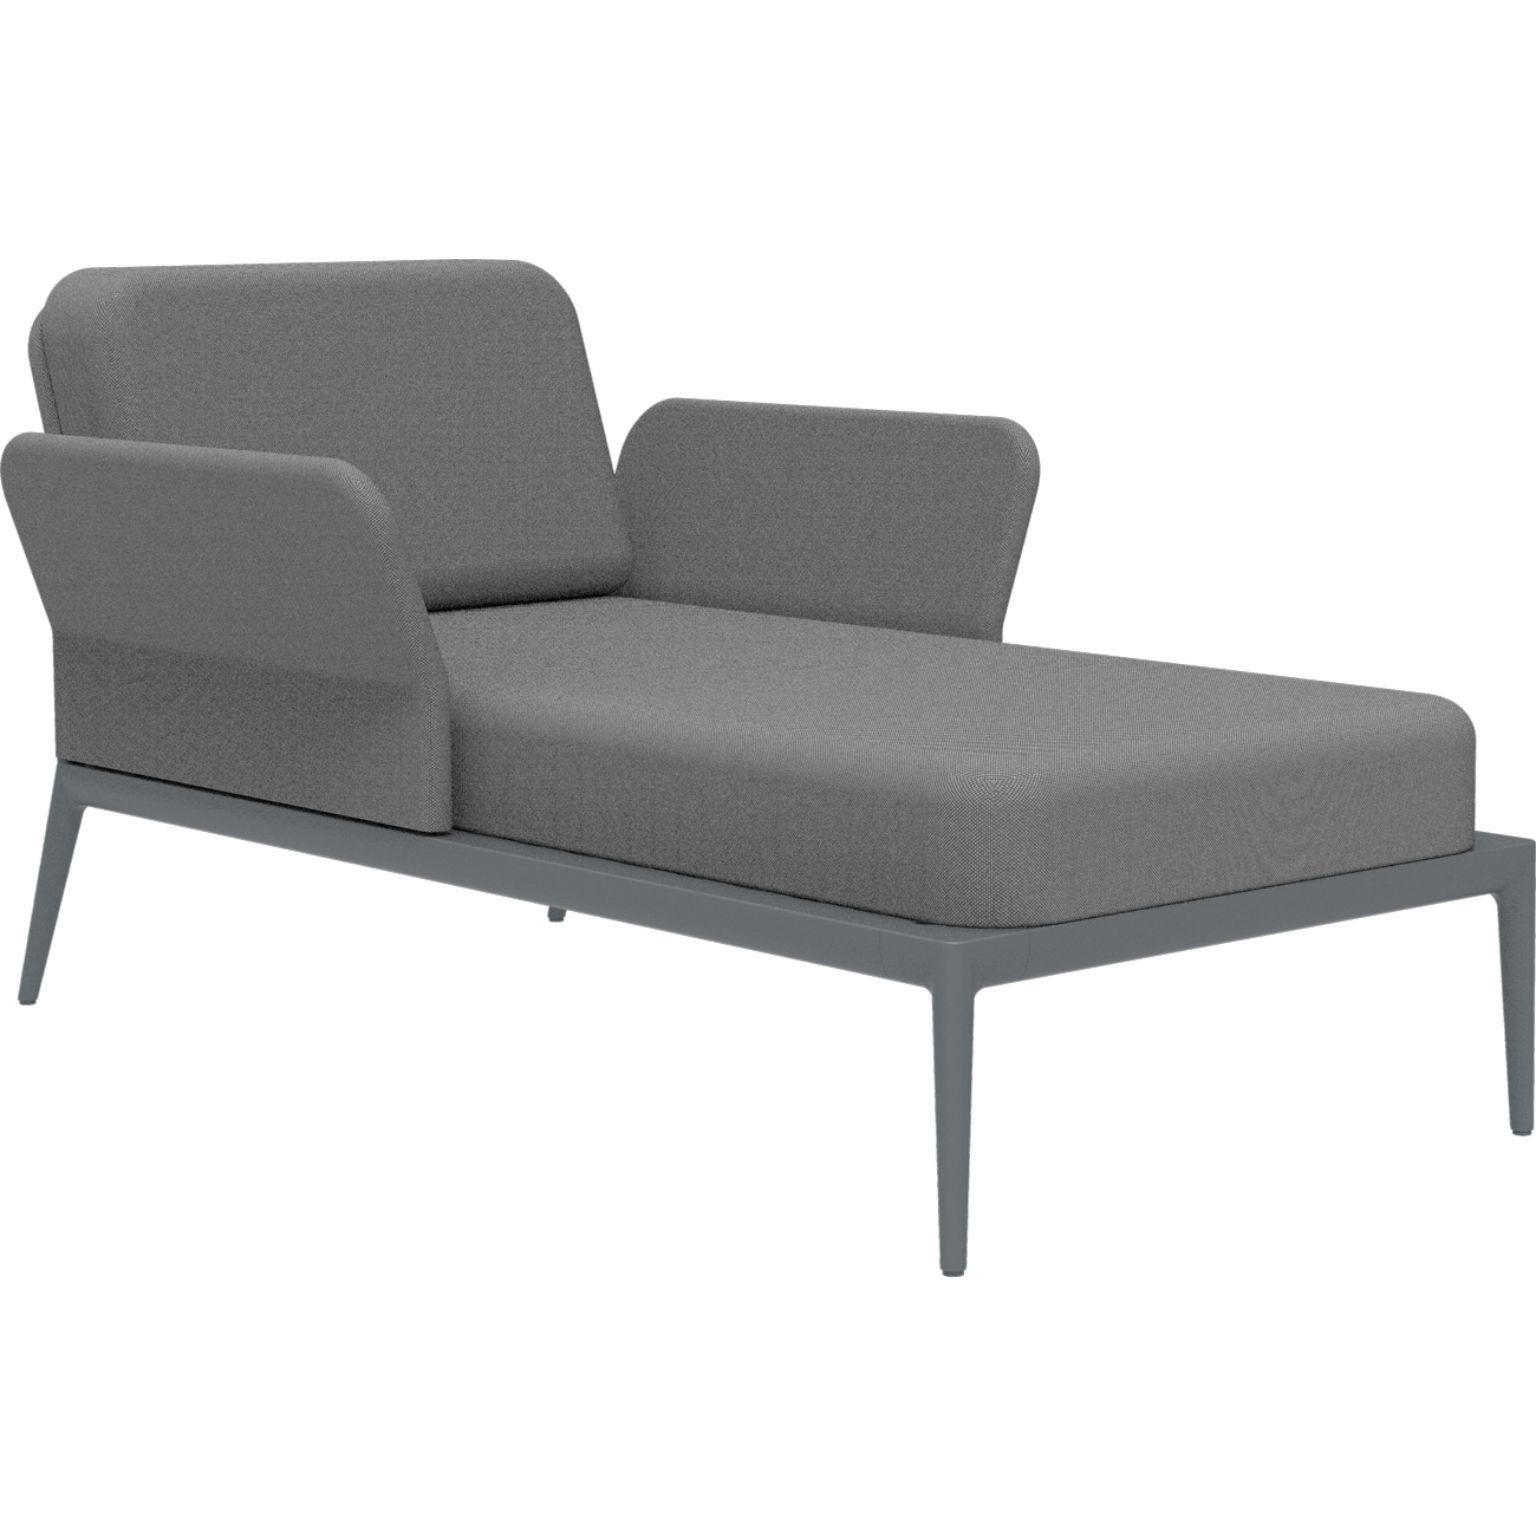 Cover grey divan by MOWEE.
Dimensions: D91 x W155 x H81 cm (seat height 42 cm).
Material: aluminum and upholstery.
Weight: 30 kg.
Also available in different colors and finishes. 

An unmistakable collection for its beauty and robustness. A